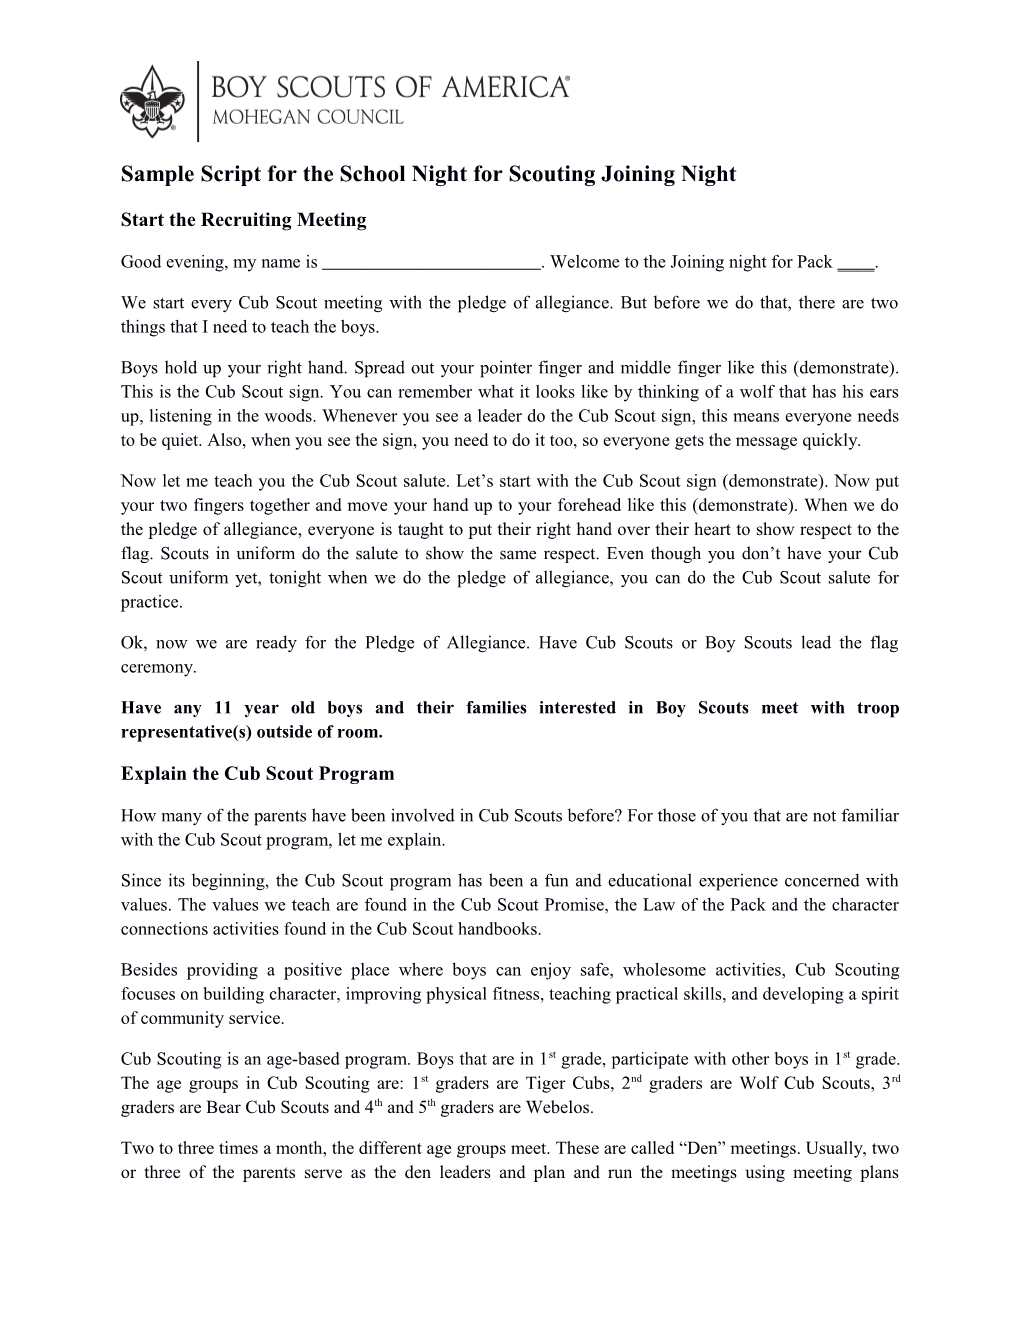 Sample Script for the School Night for Scouting Joining Night